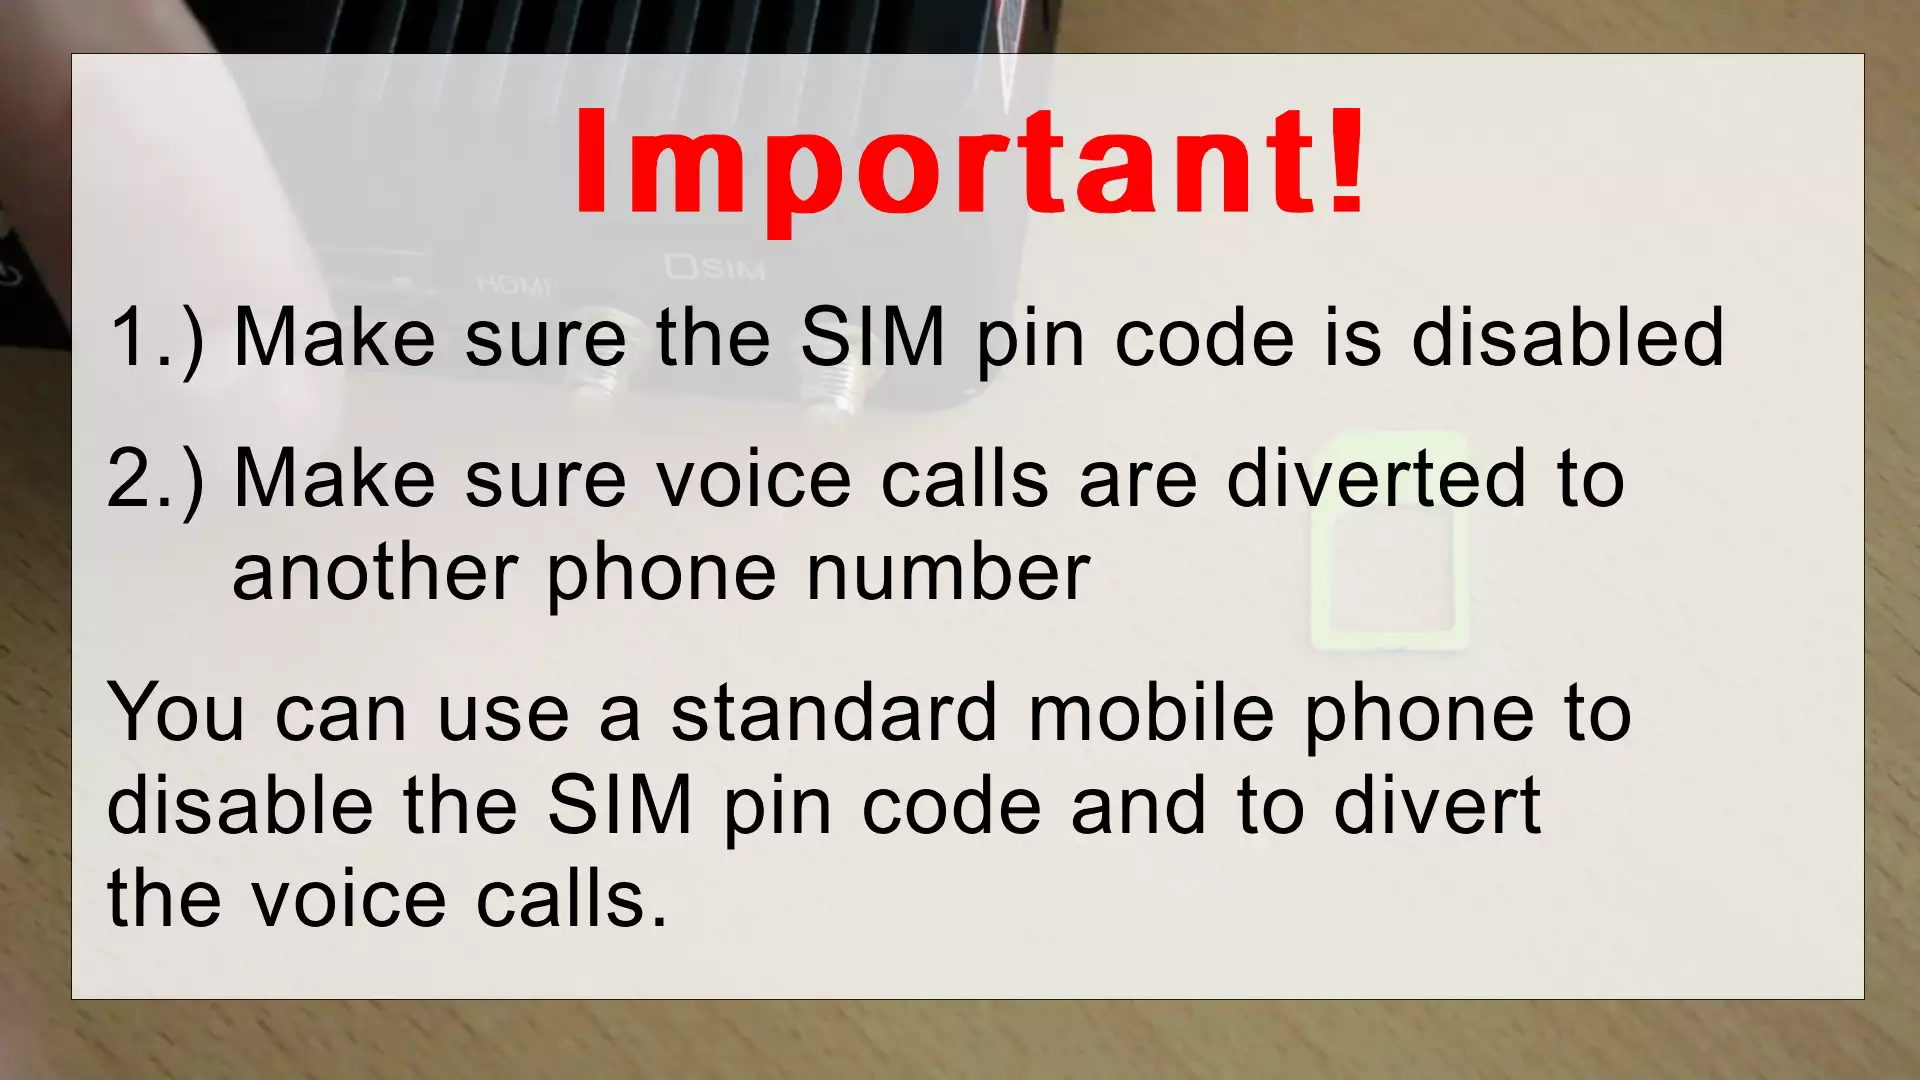 disable pin code and divert calls to other phone number you can do this on standard mobile phone